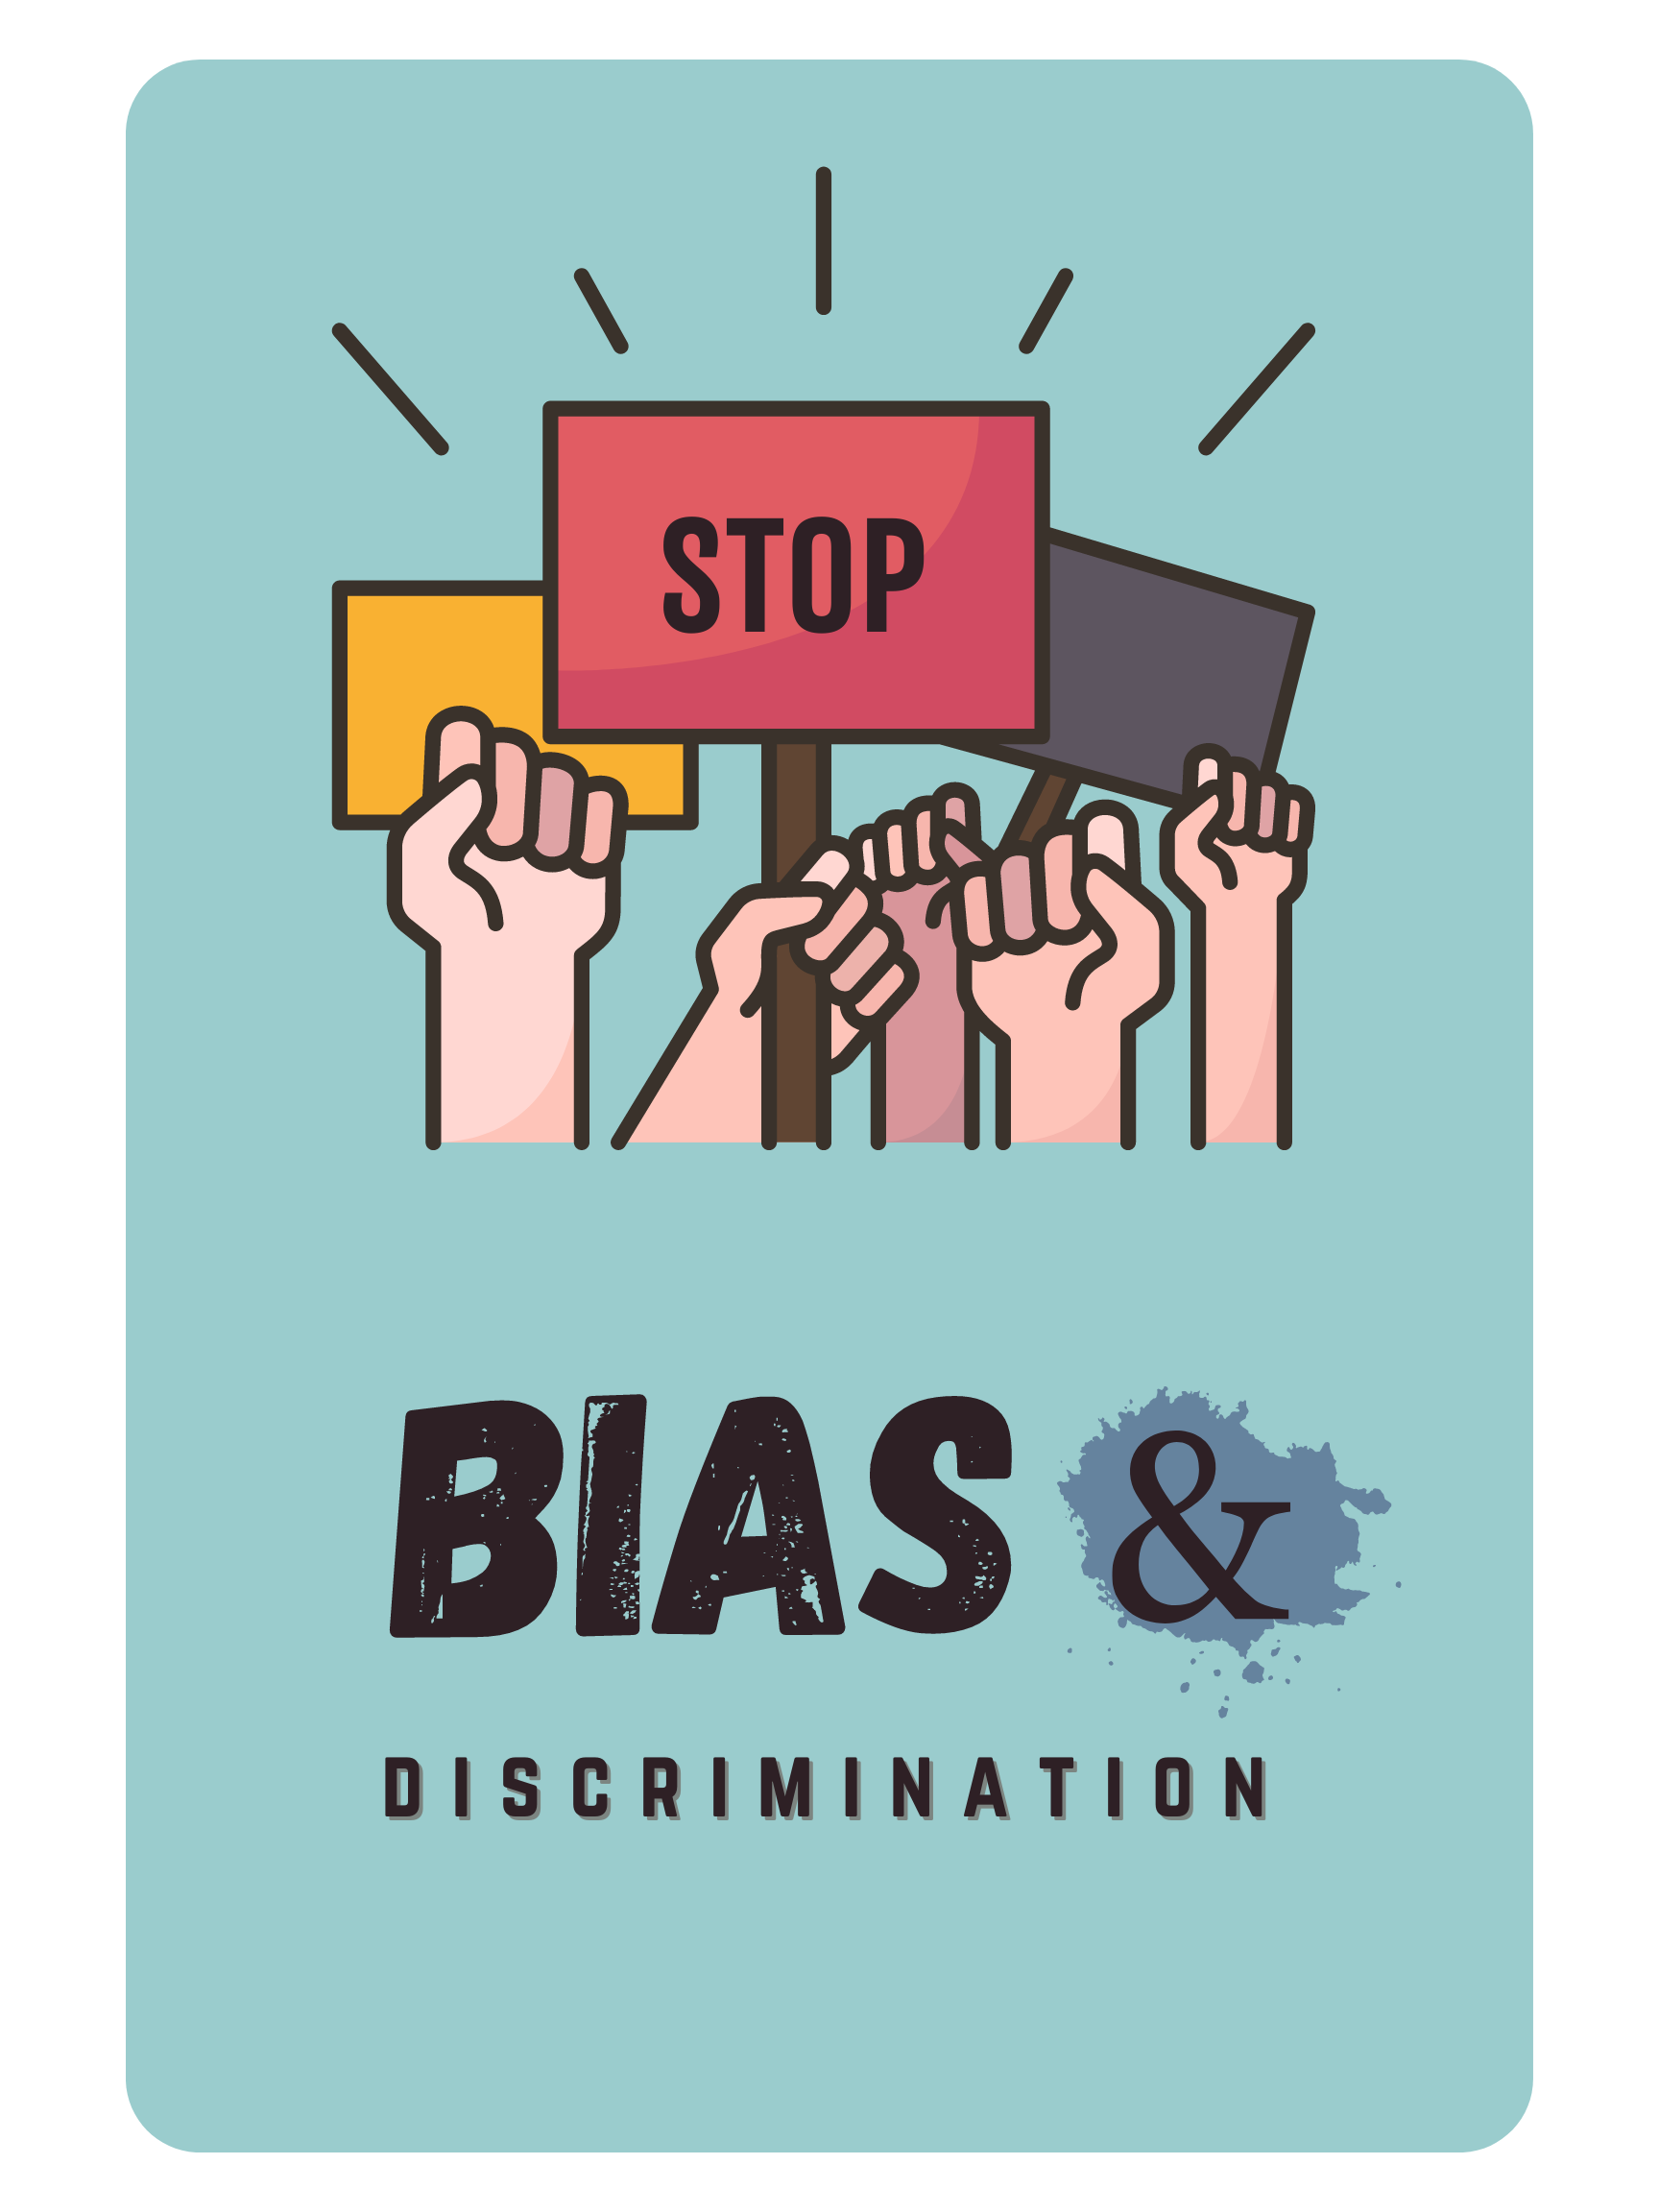 hands holding up signs saying "stop" with the text "bias and discrimination" below the hands